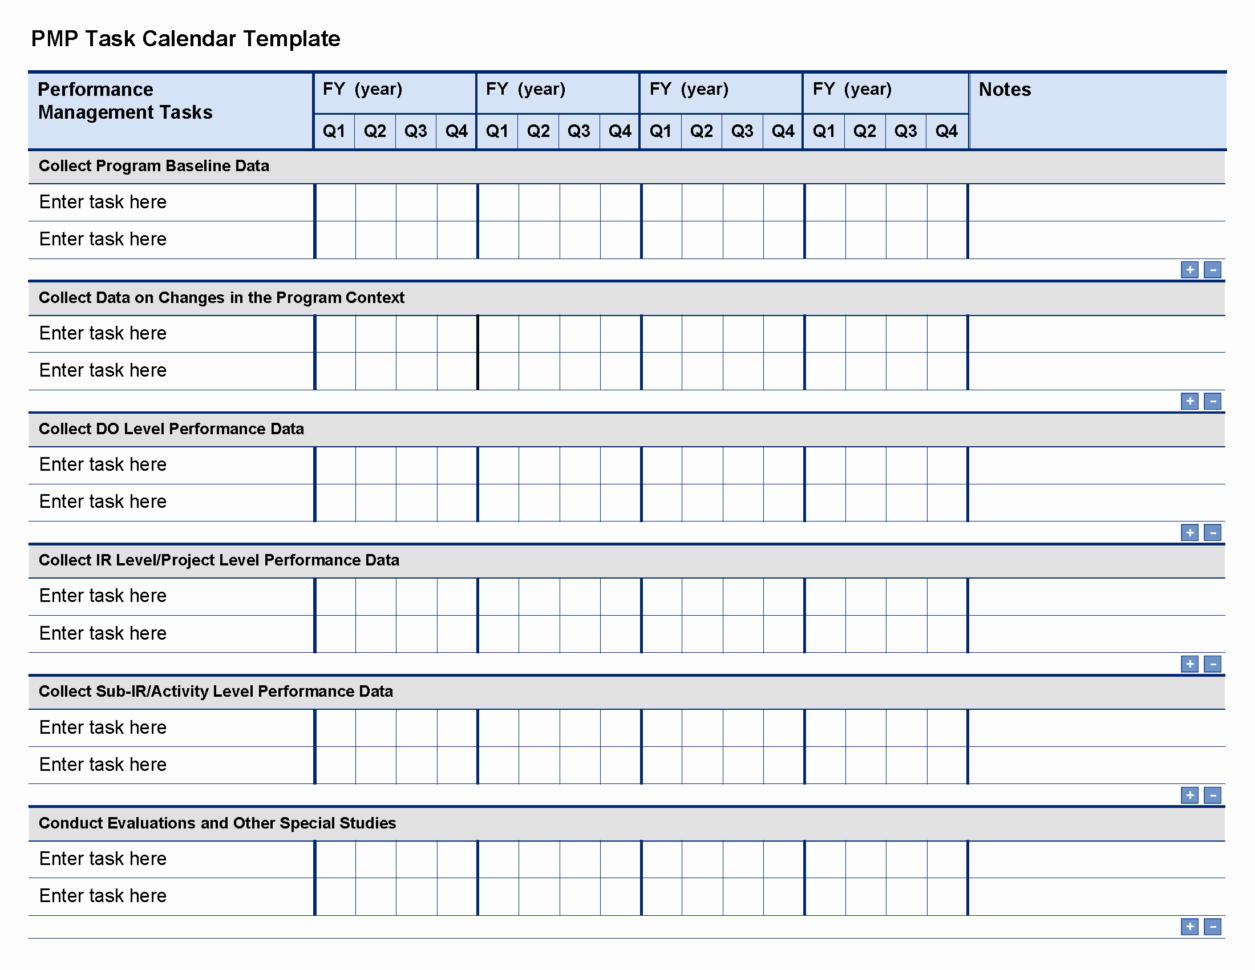 Activity Log Excel Template